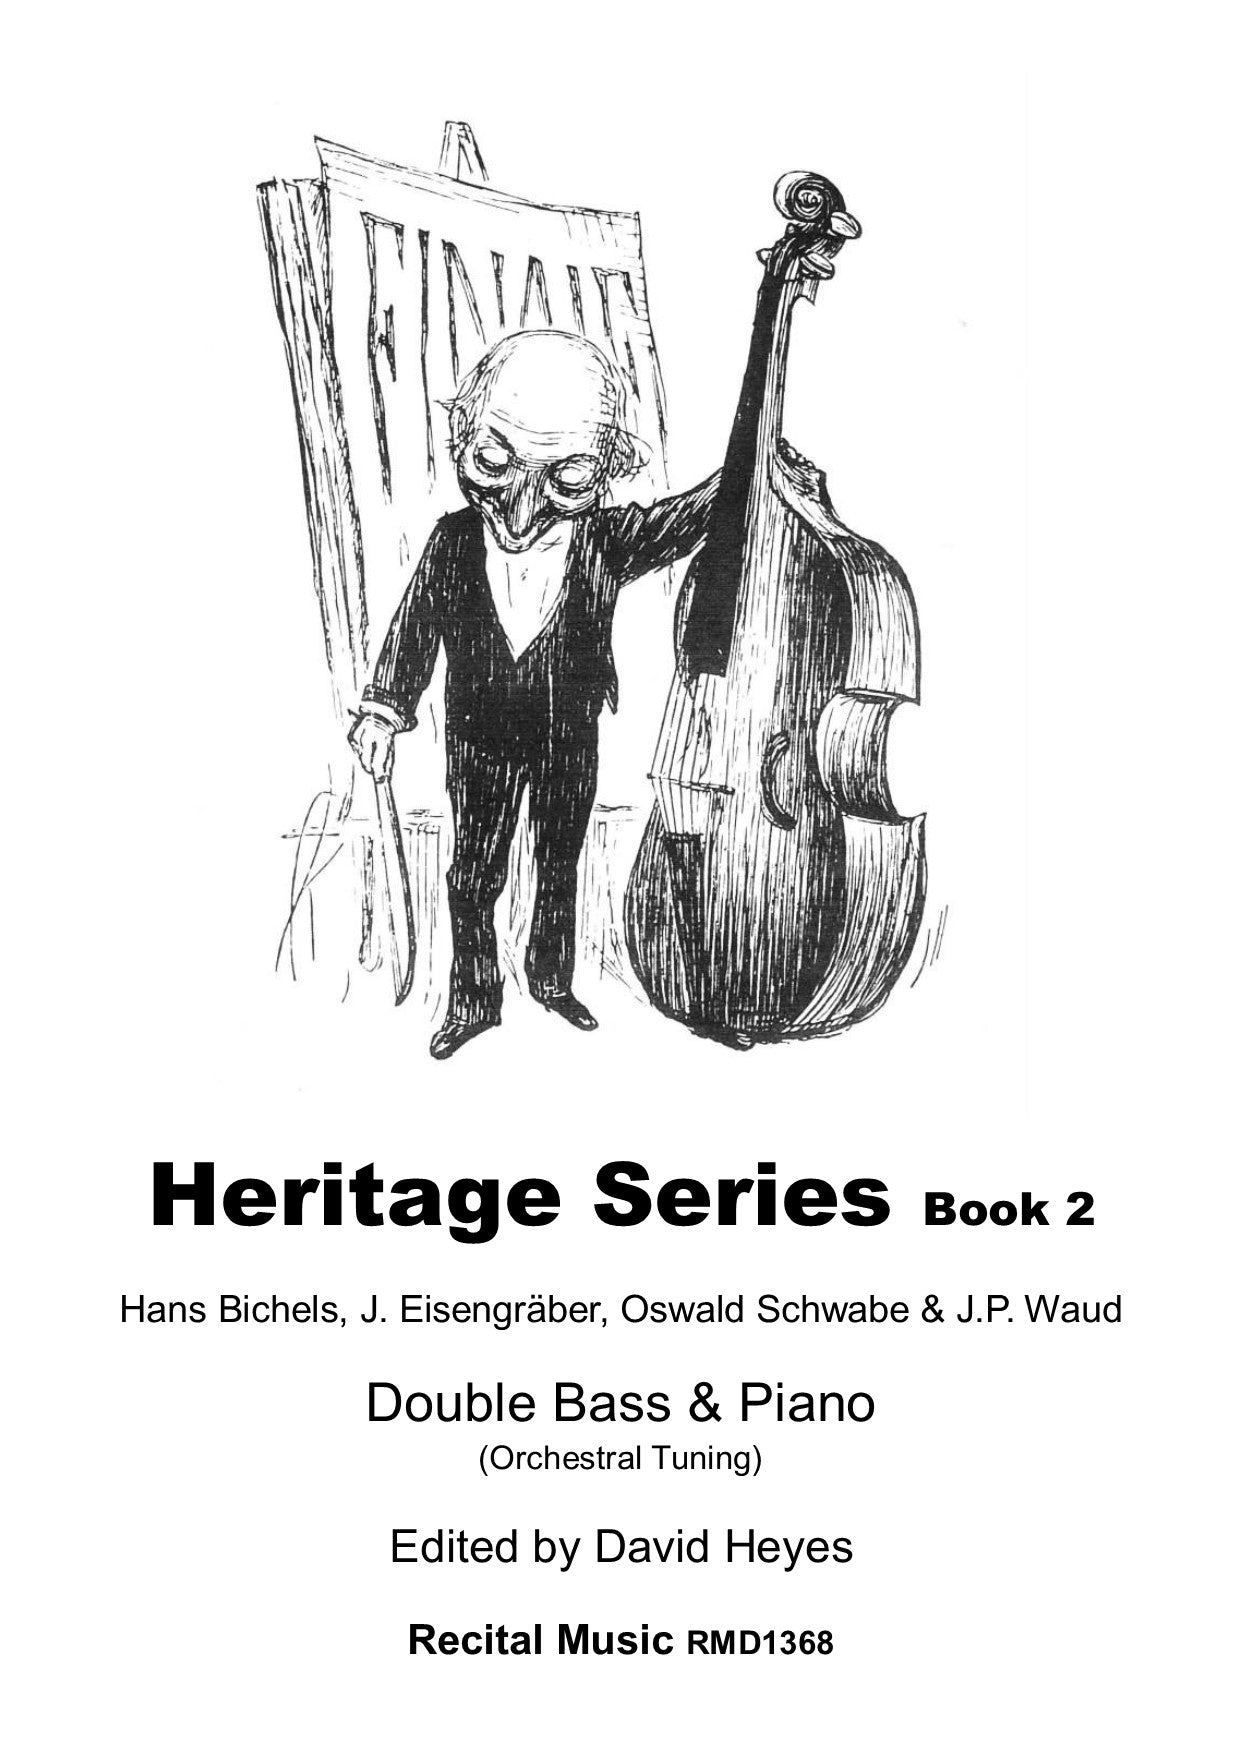 Heritage Series Book 2 for double bass & piano (ed. David Heyes)